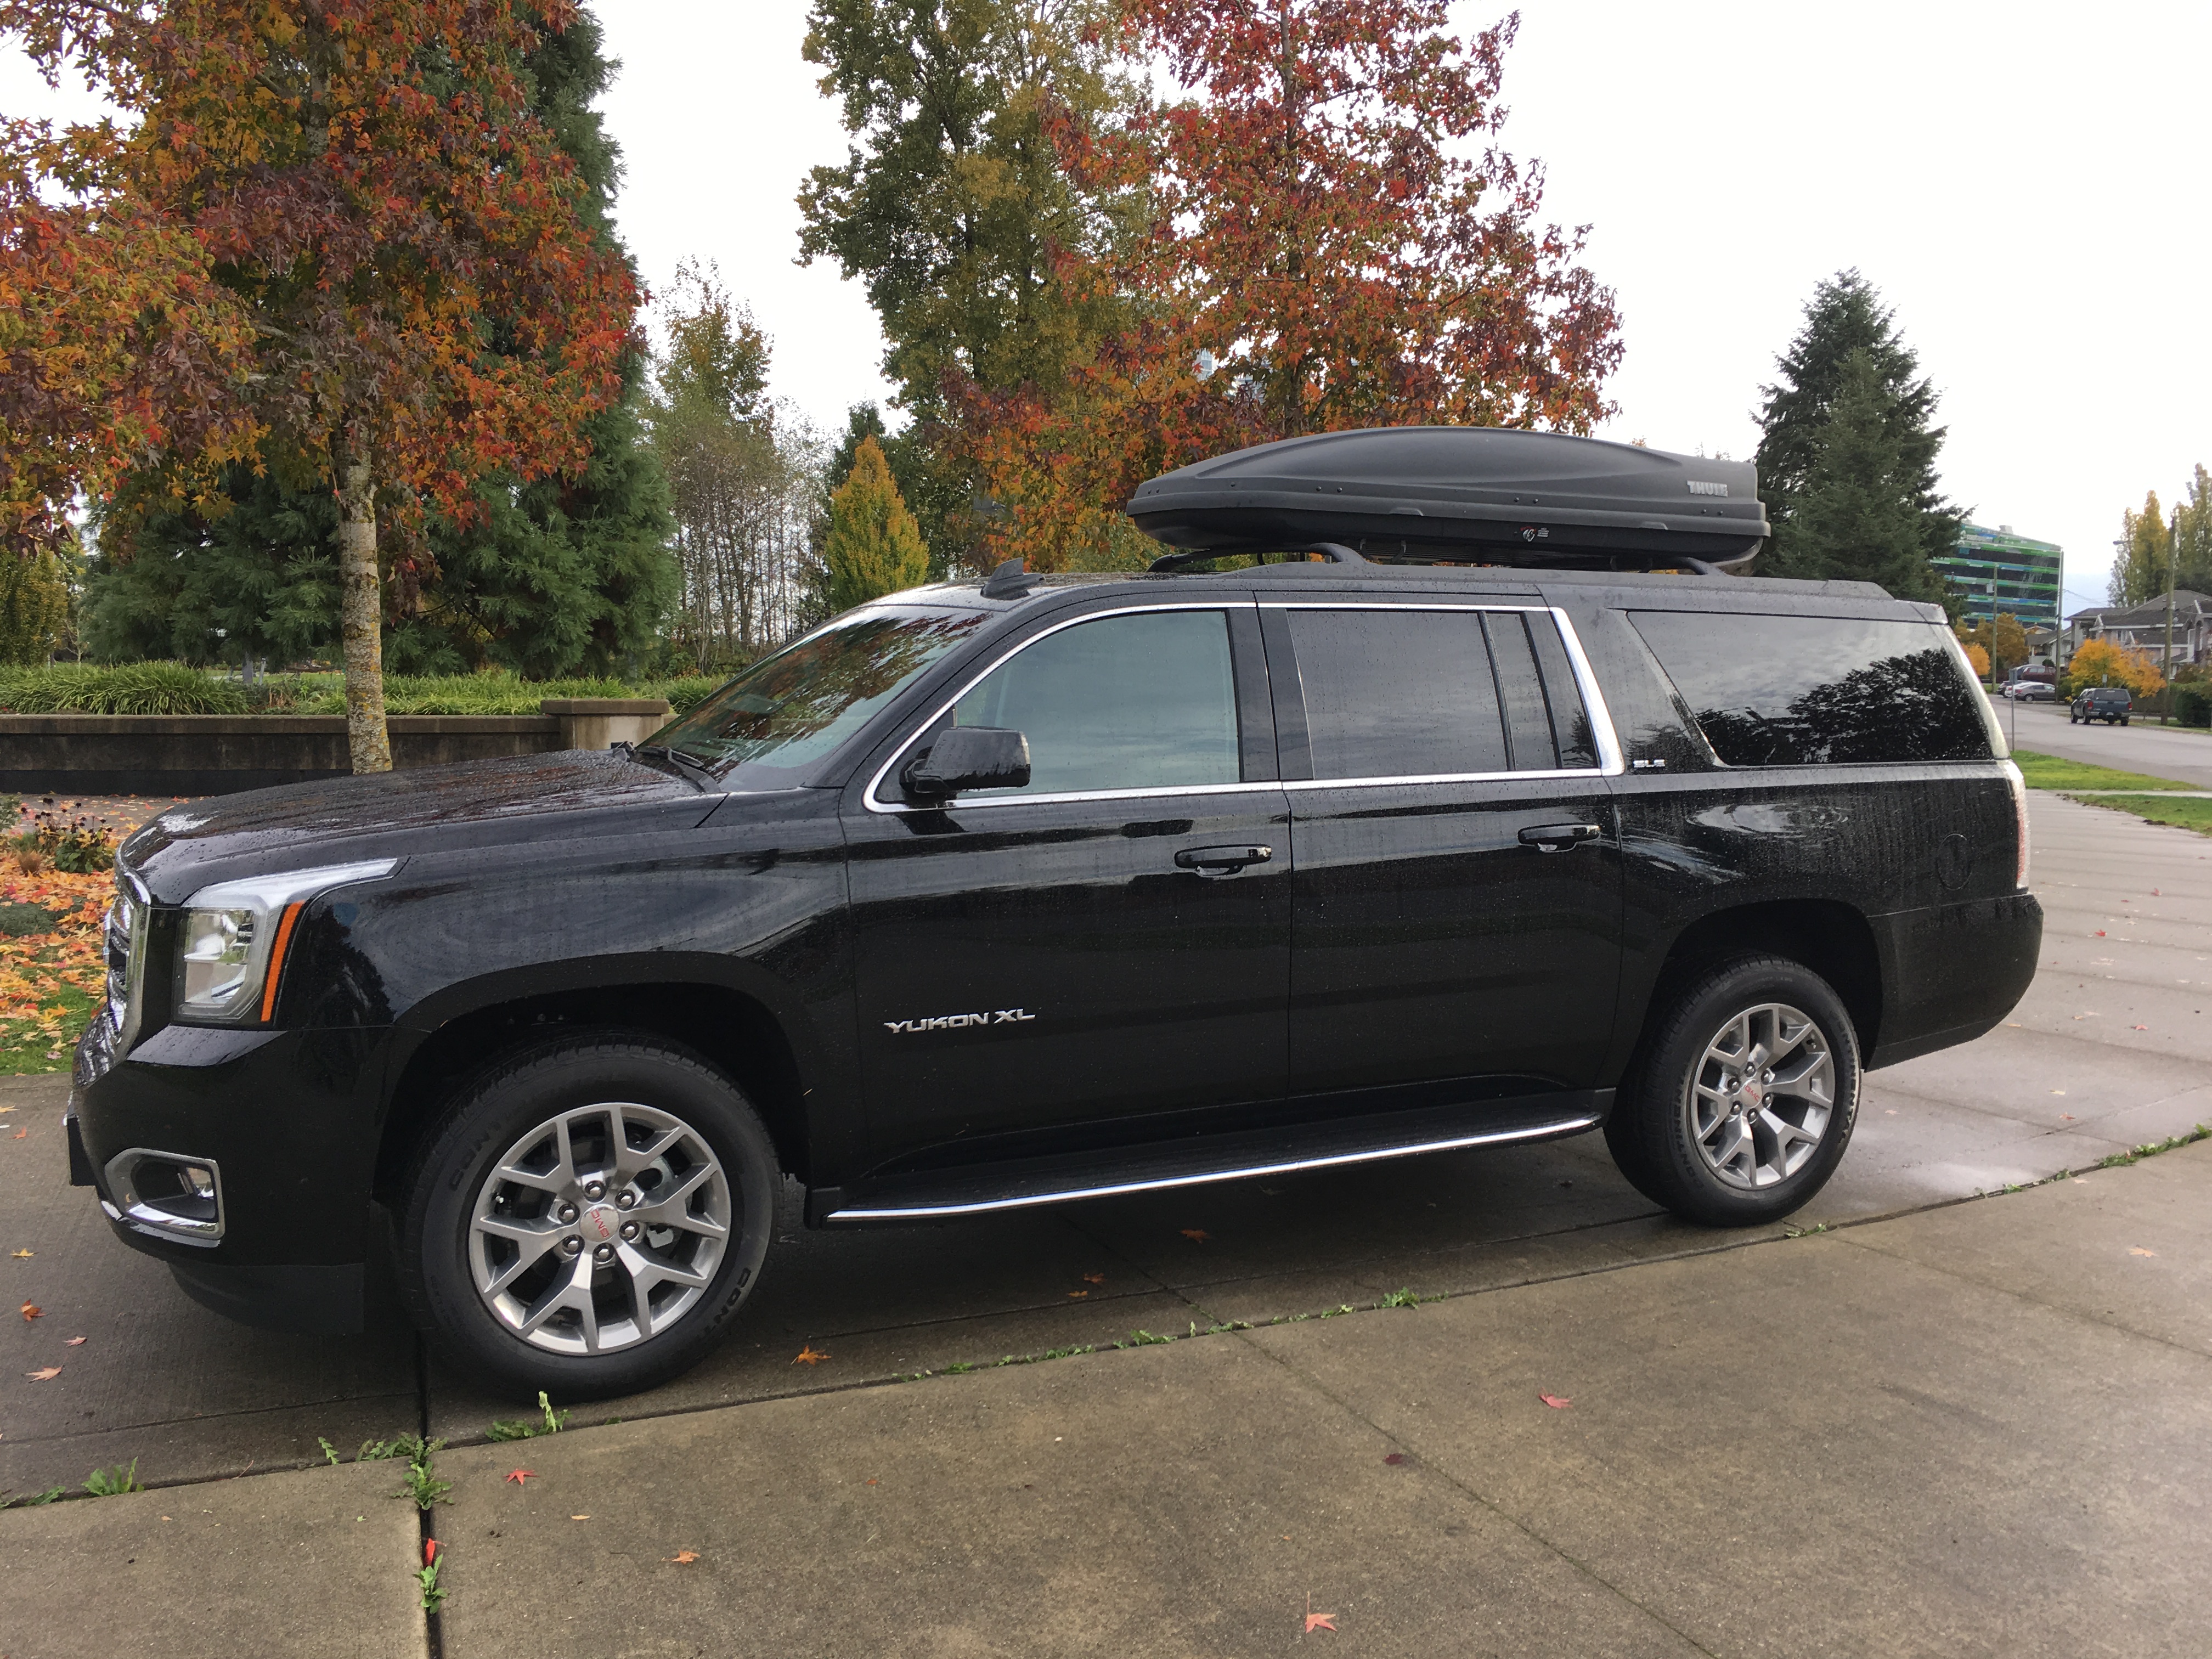 What are the key factors that make limos in Vancouver stand out?